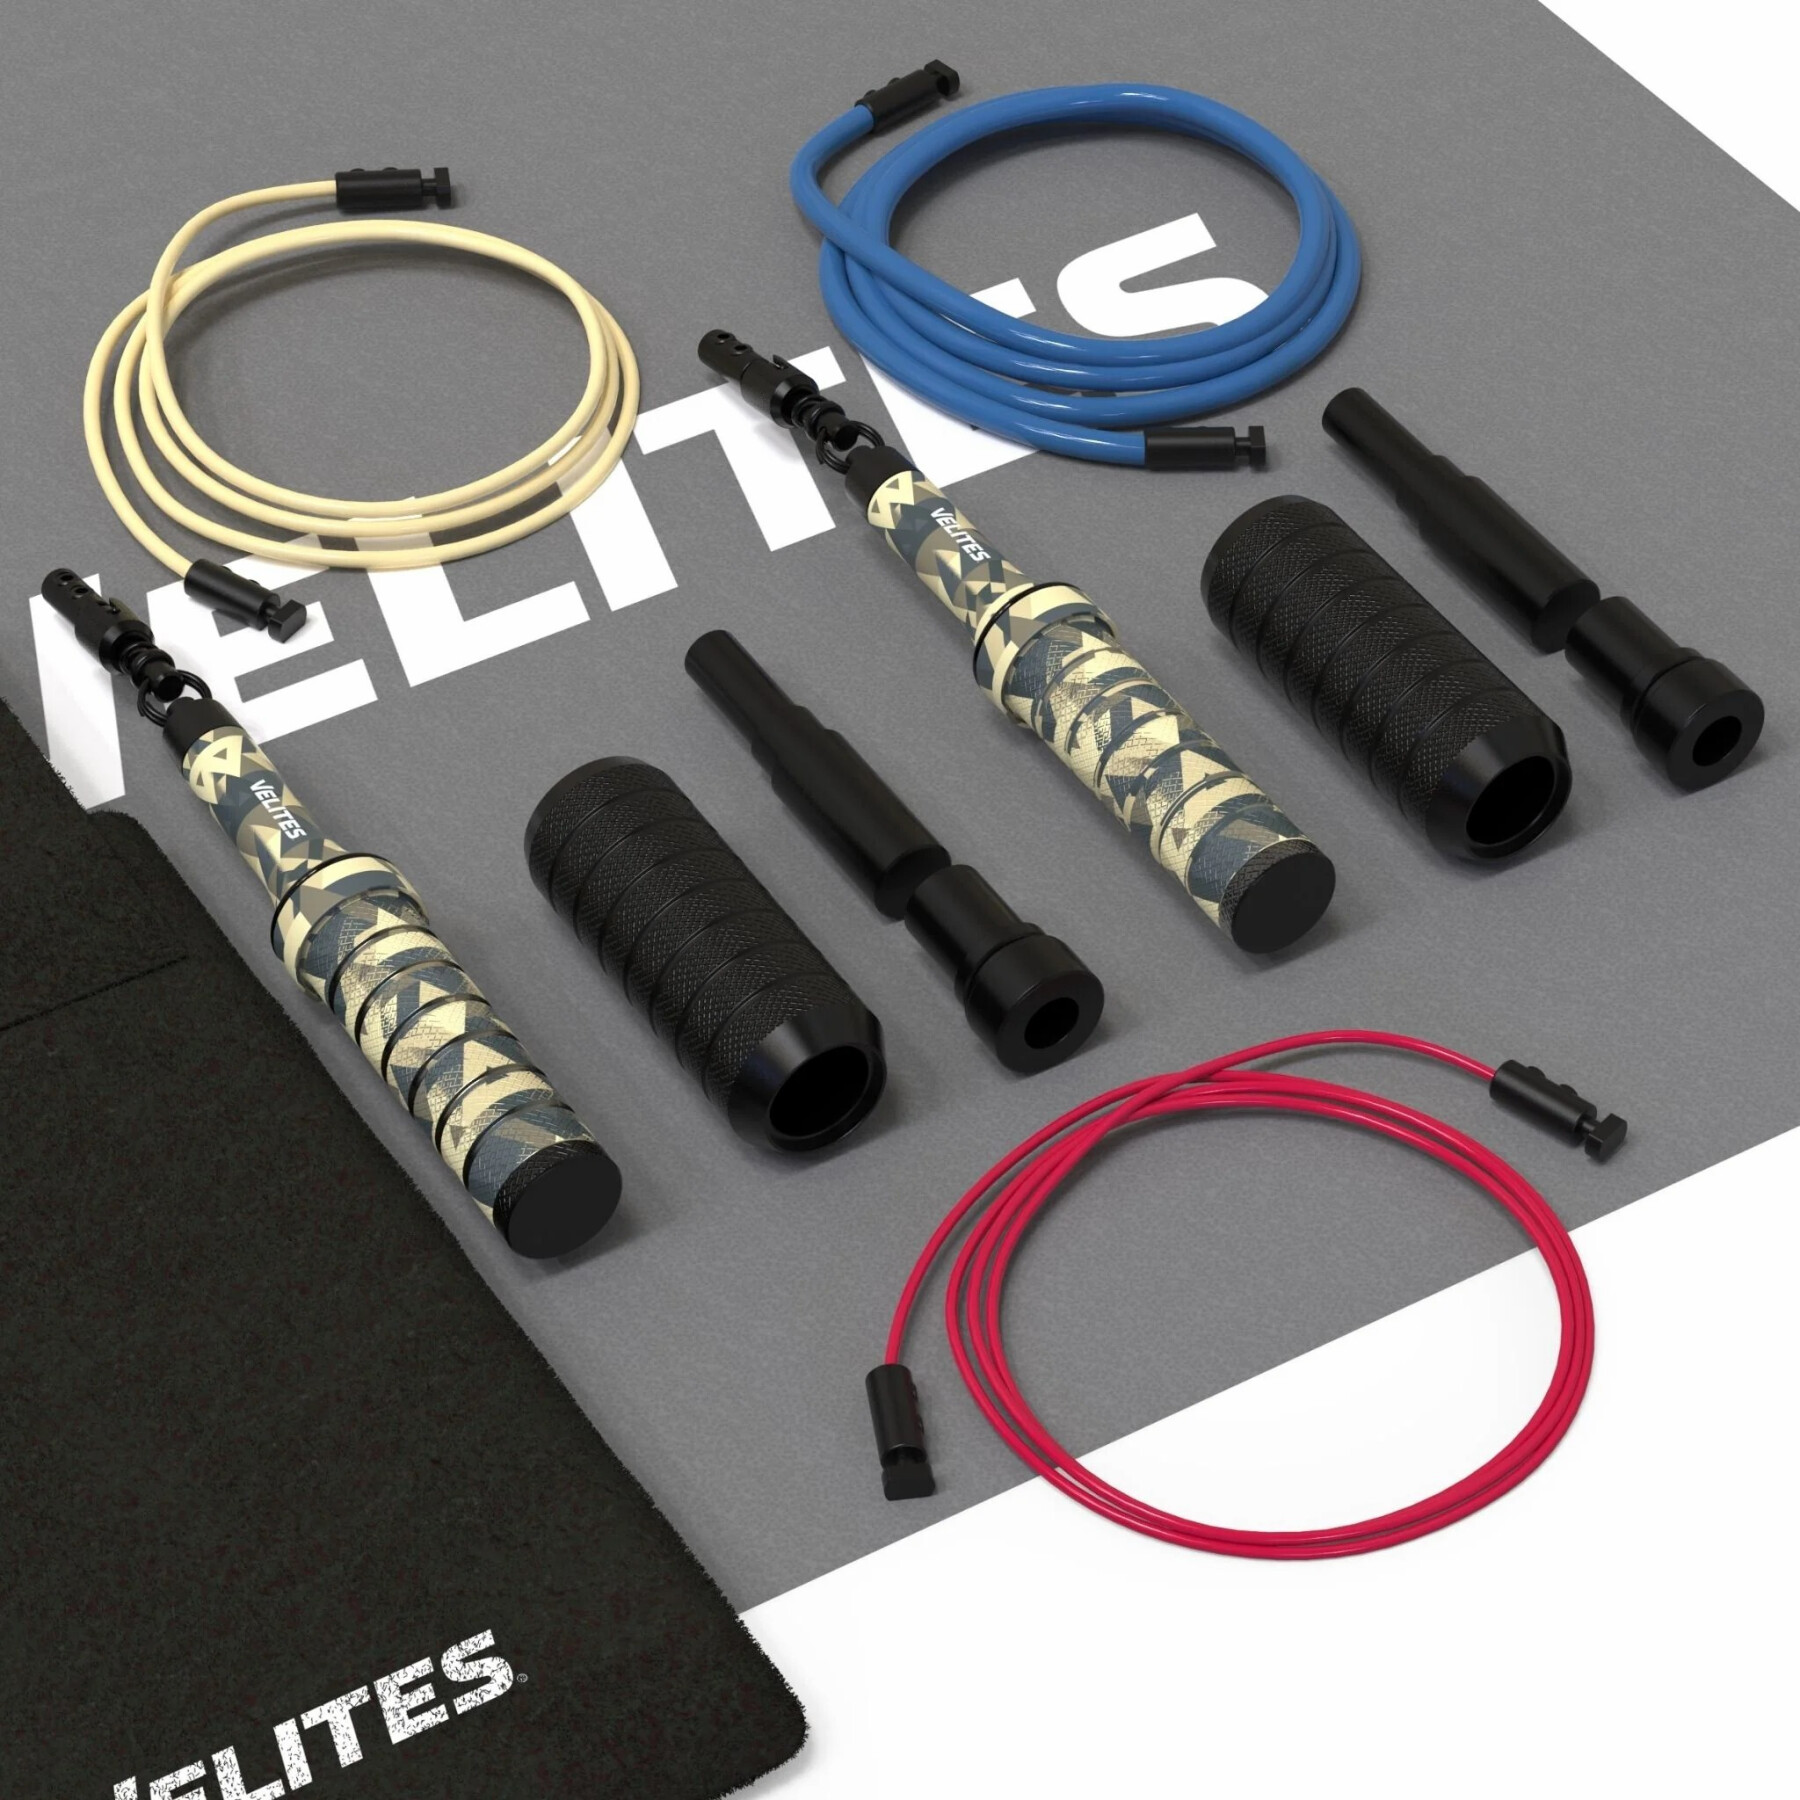 Weighted skipping rope set with cables Velites Earth 2.0